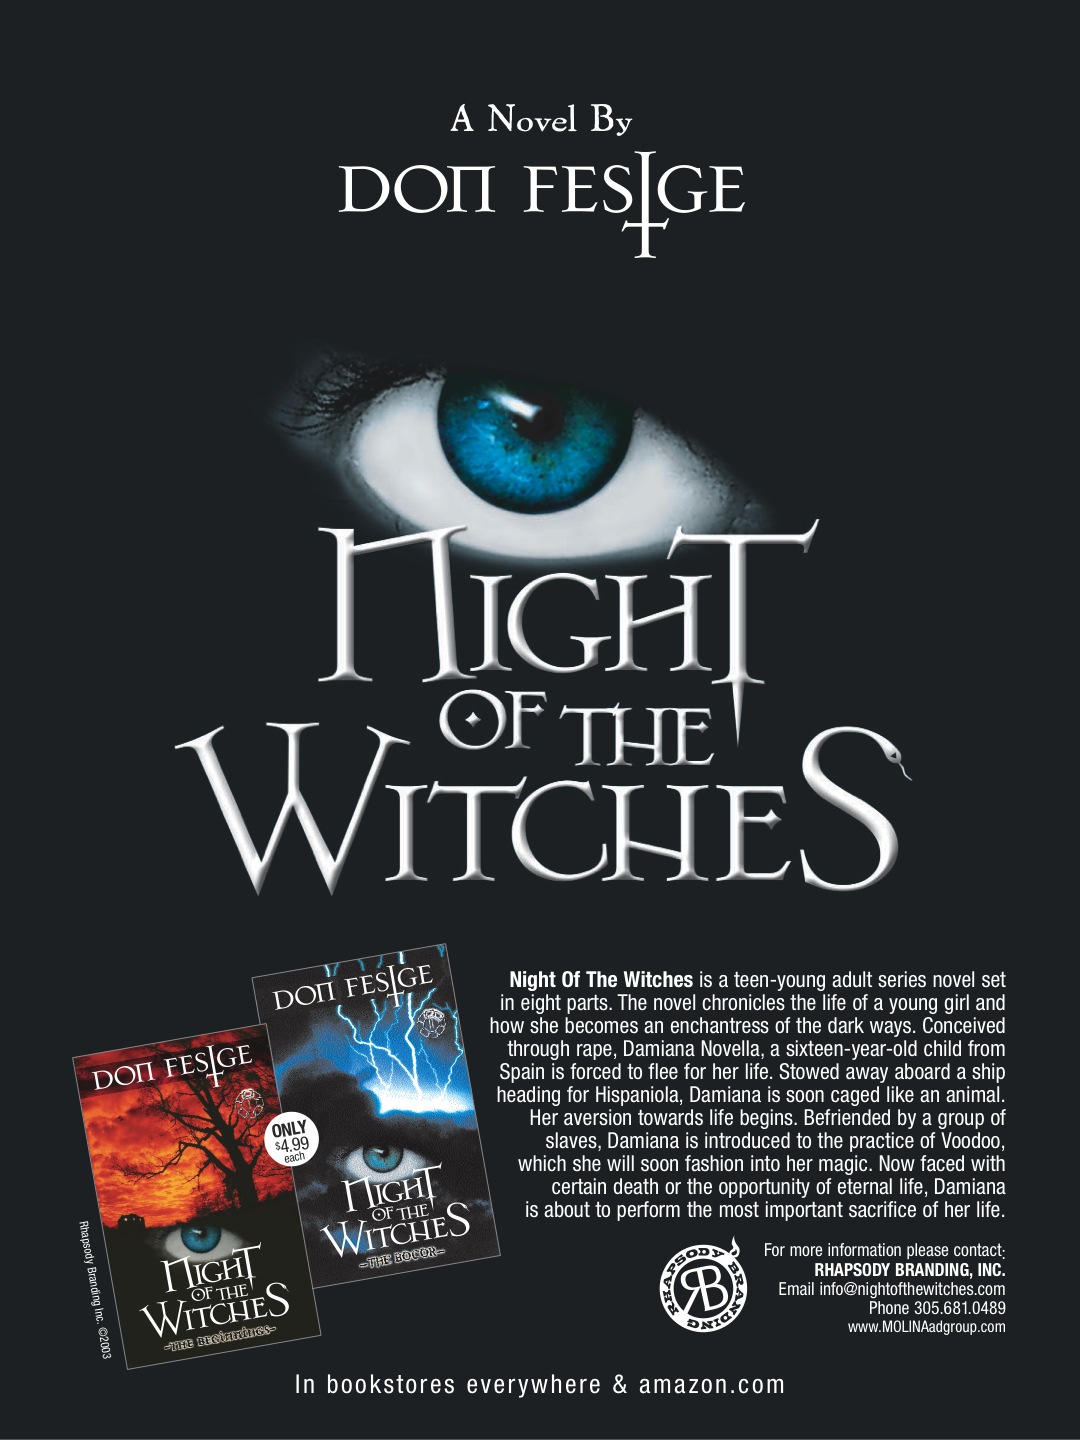 Night Of The Witches Series Written by Don Festge